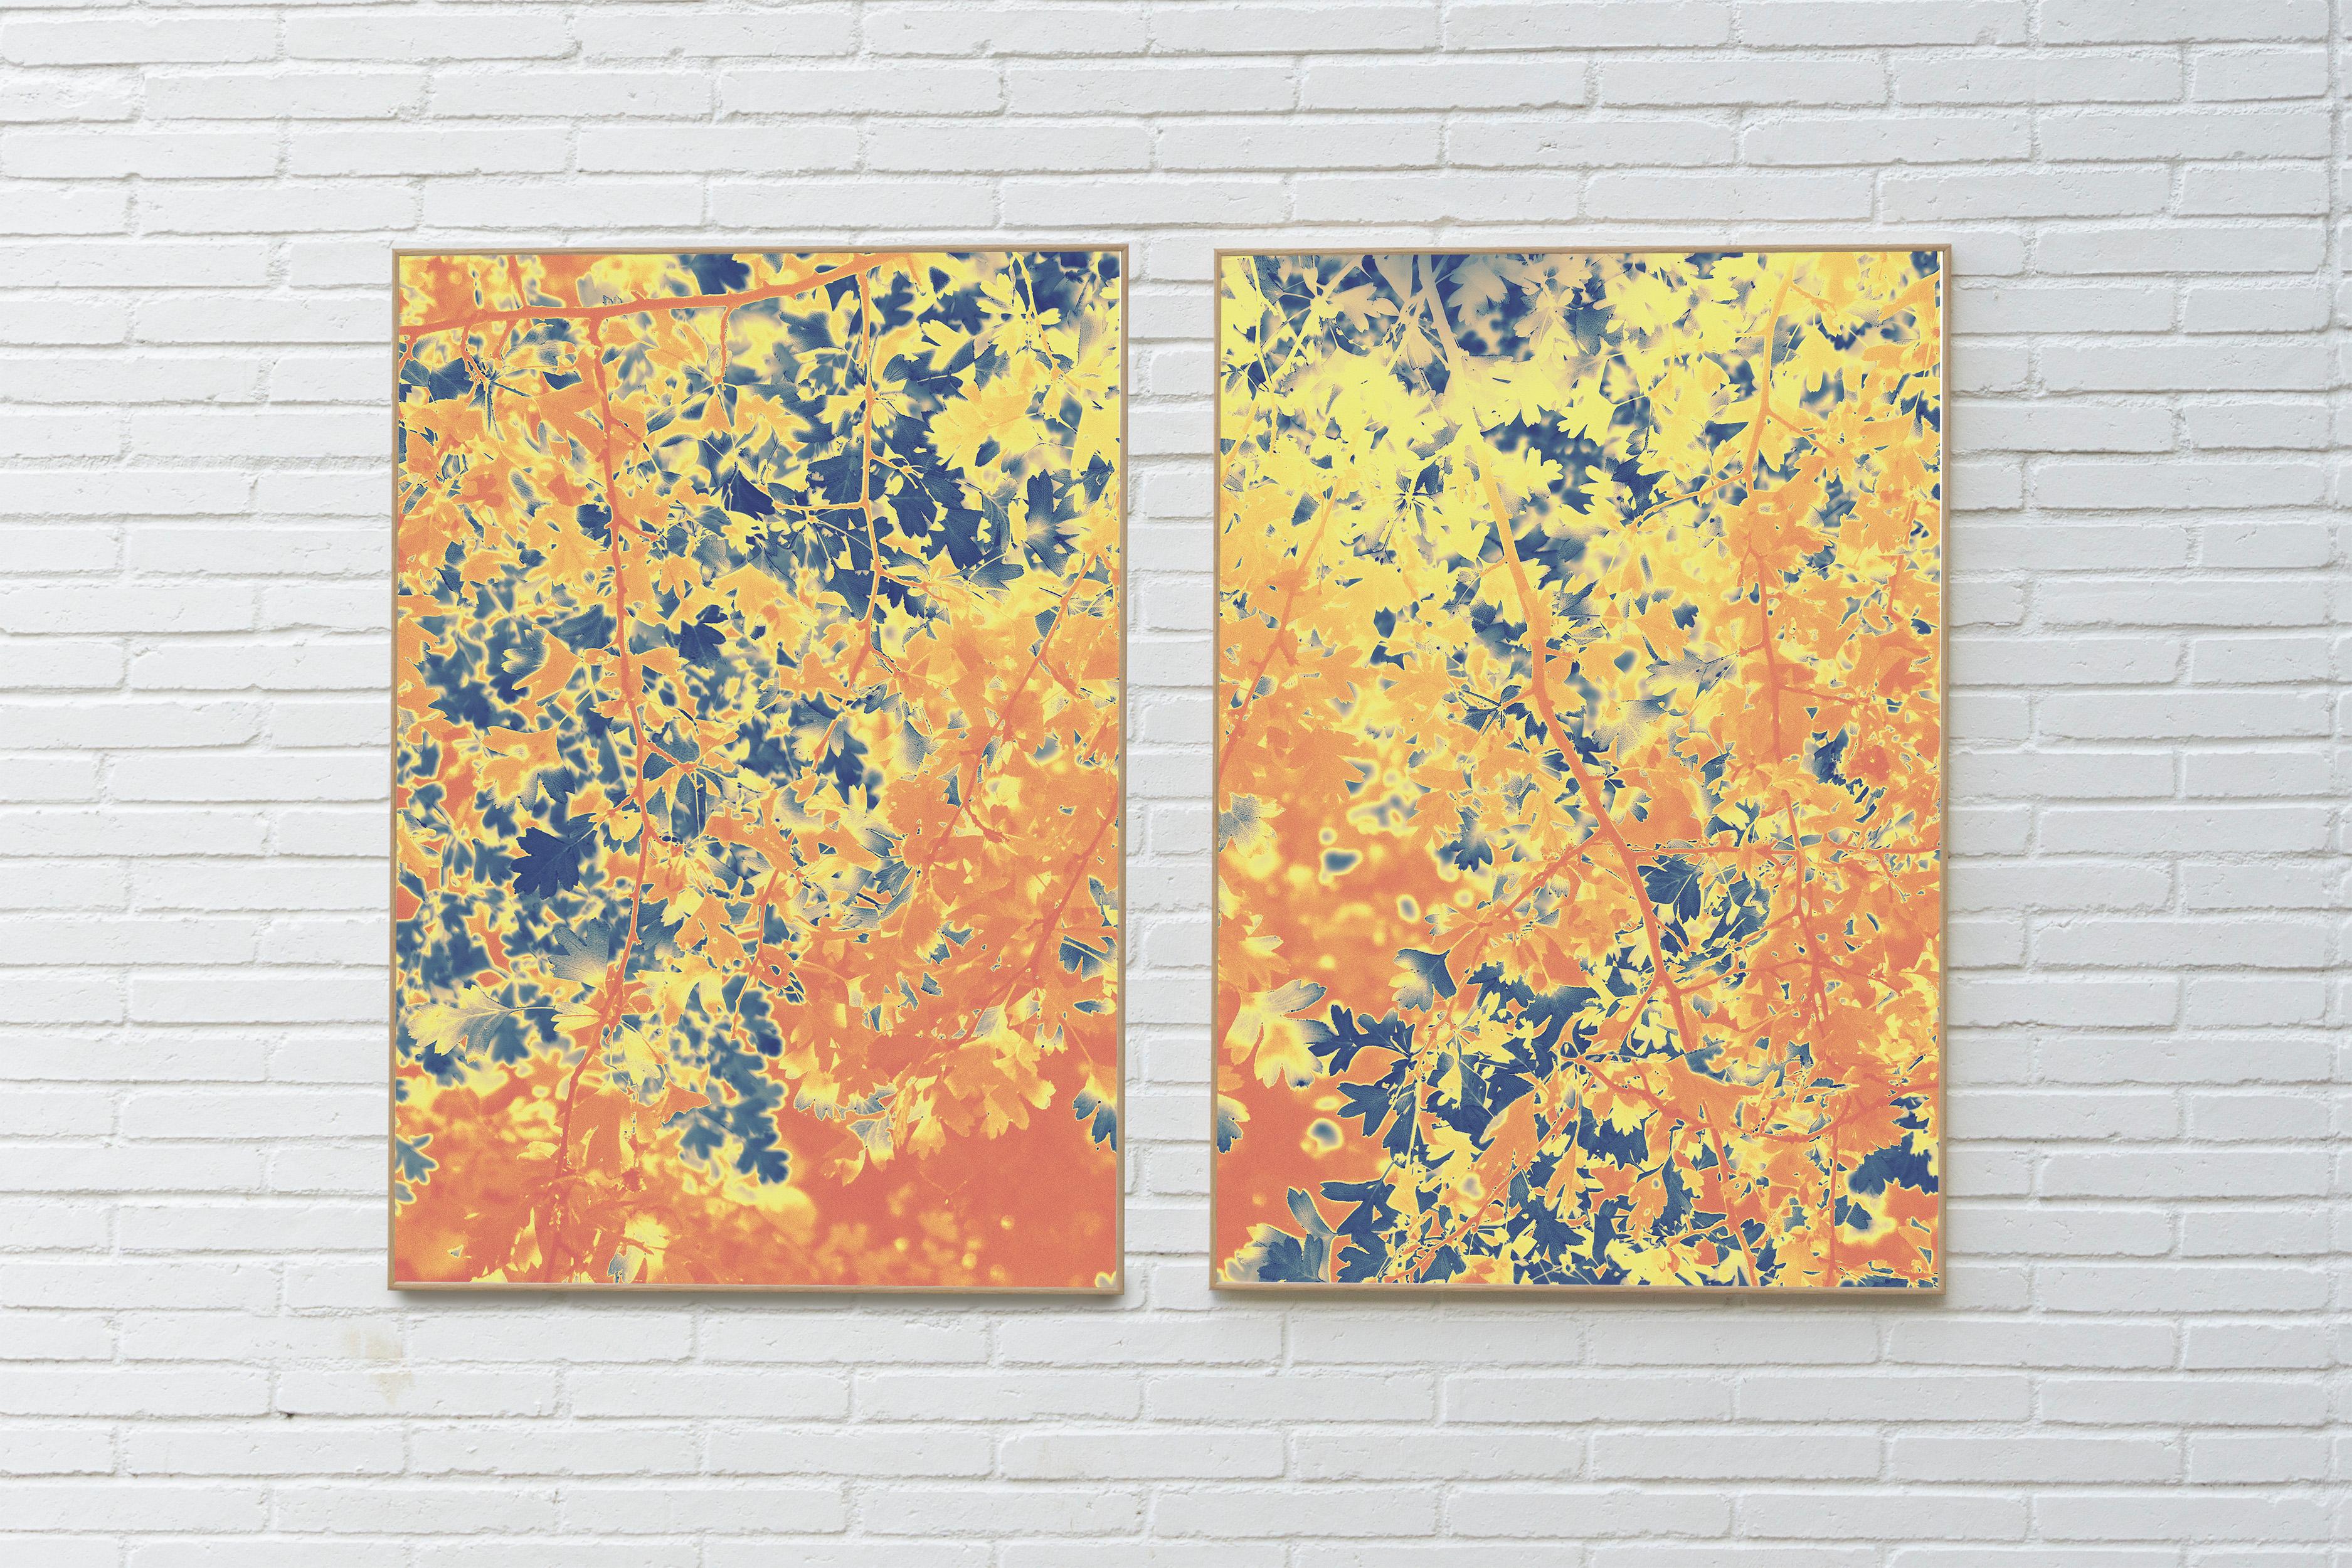 Forest Embers, Giclée Print Diptych Landscape, Warm Tons Abstract Autumn Leaves  - Photograph by Ryan Rivadeneyra